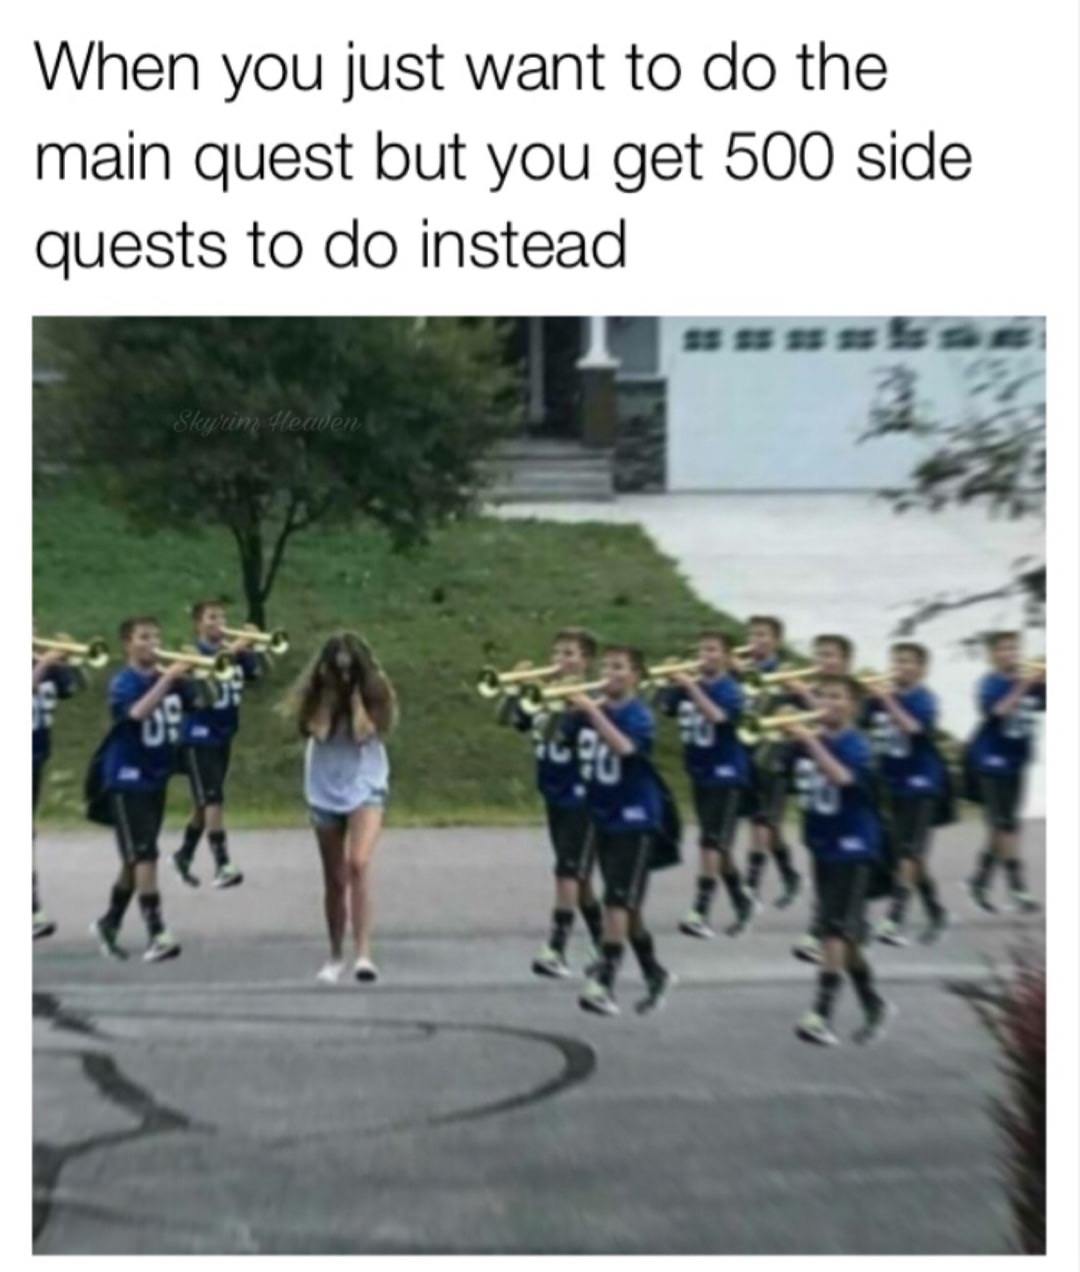 sensory overload meme - When you just want to do the main quest but you get 500 side quests to do instead Ss Ss Skyrim lewen